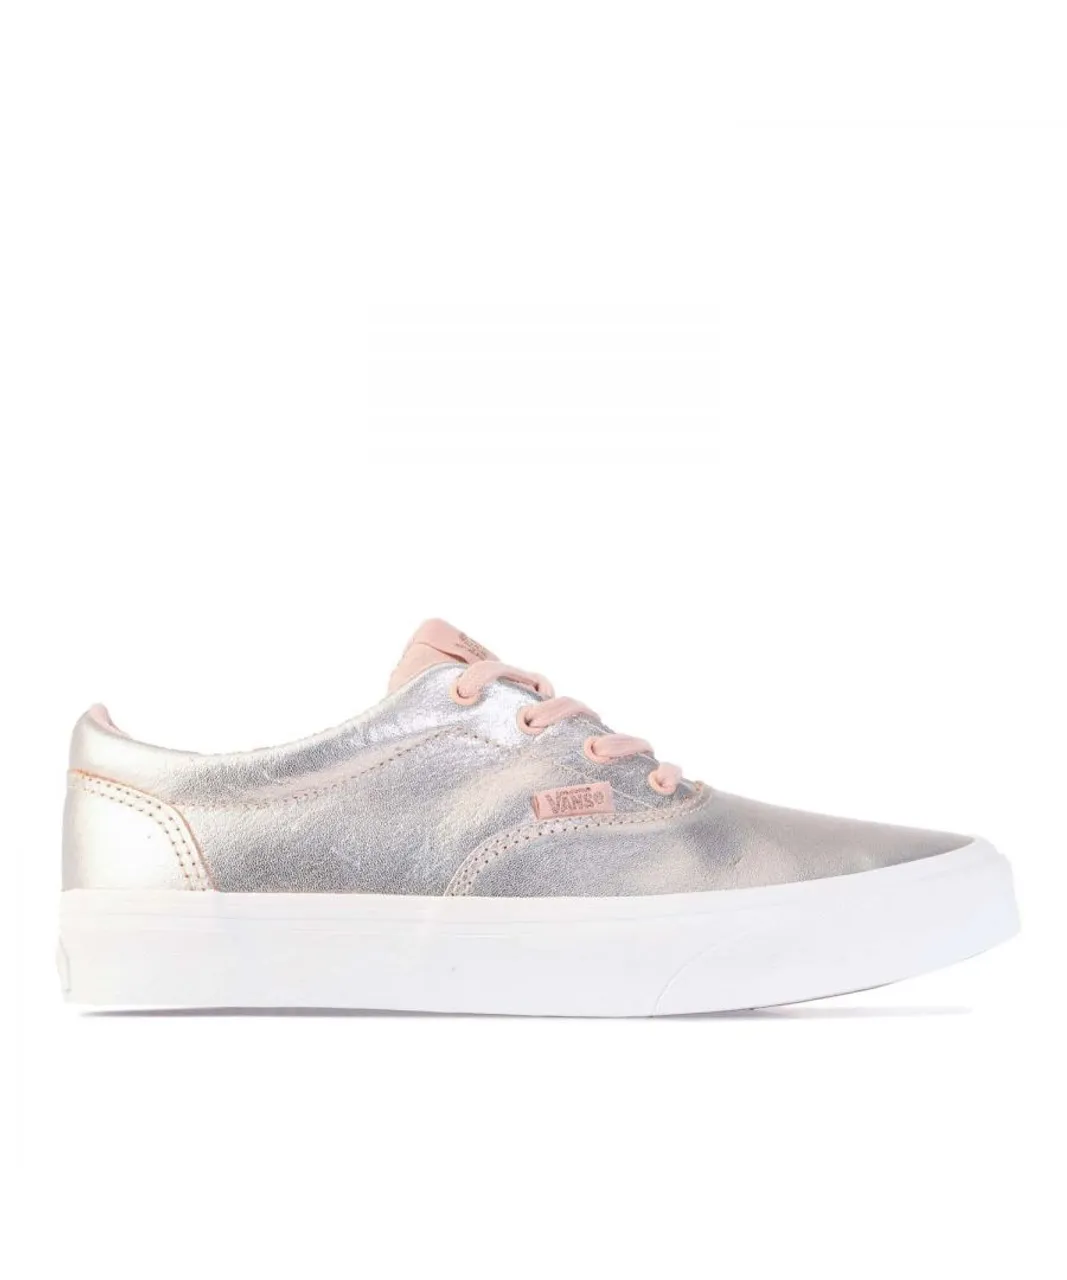 Vans Girls Girl's Junior Doheny Trainers in Rose Gold Canvas